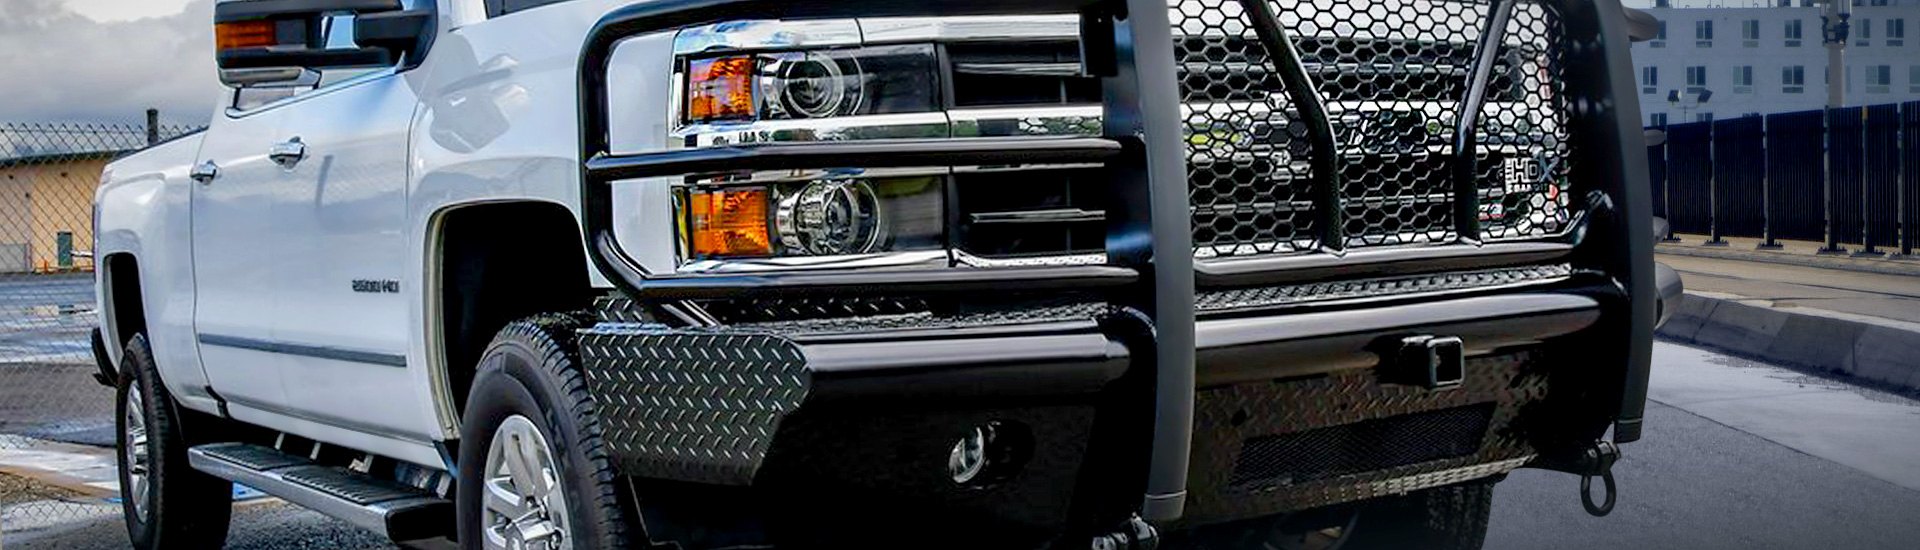 The Right Way To Modify Your HD Truck: New HDX Bandit Bumper by Westin